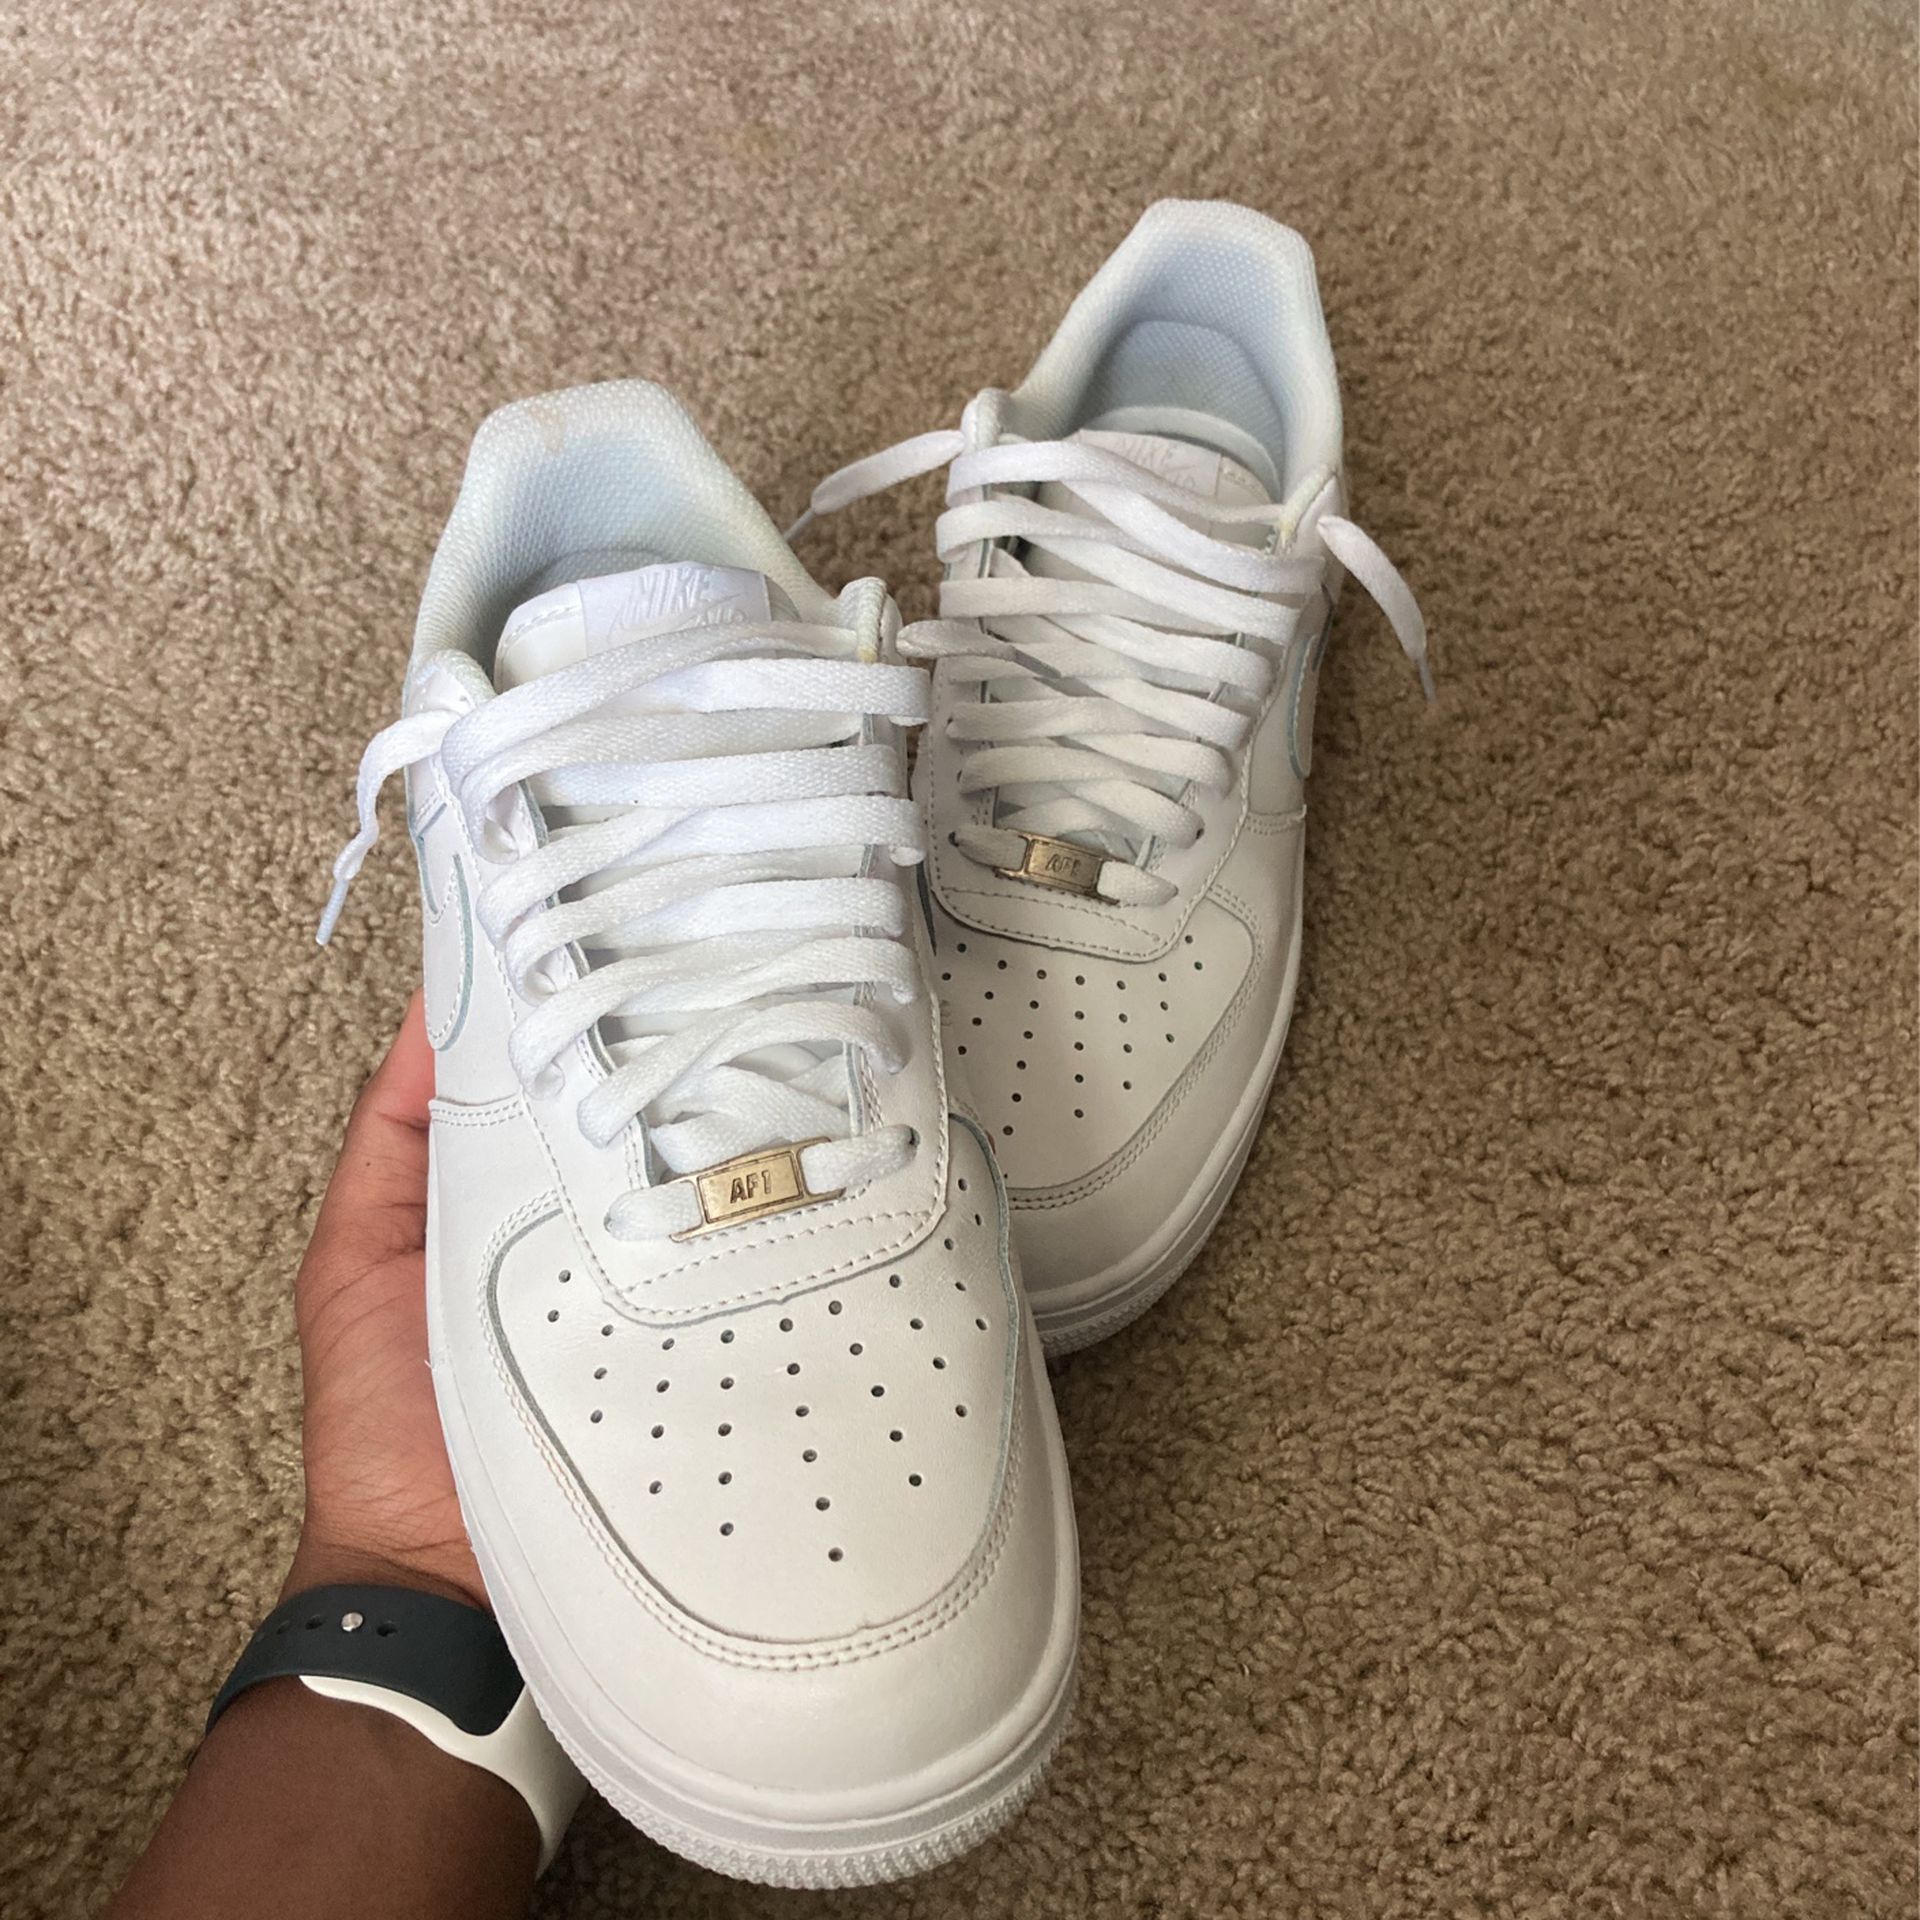 Af1 for Sale in Greensboro, NC - OfferUp